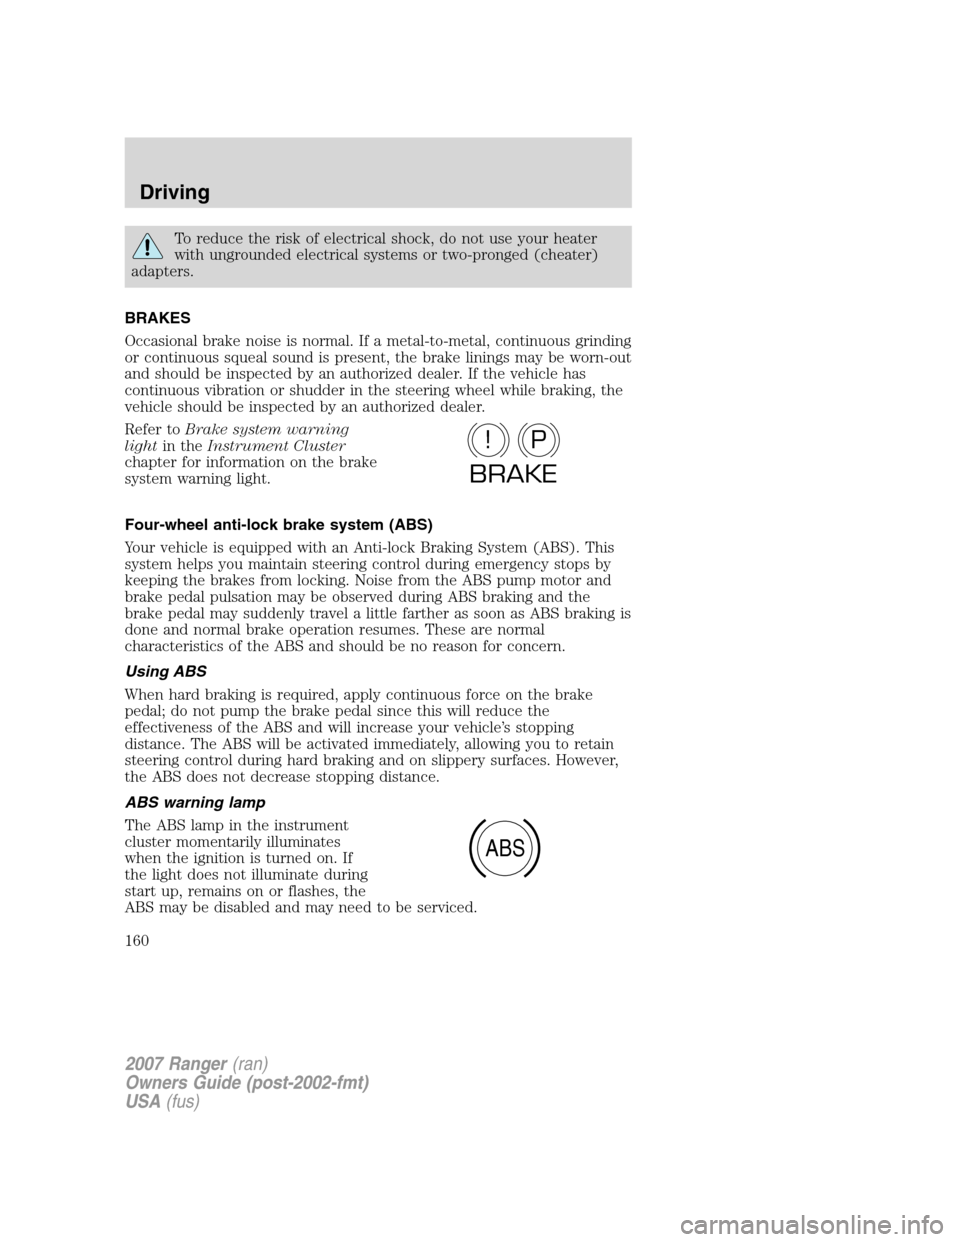 FORD RANGER 2007 2.G Service Manual To reduce the risk of electrical shock, do not use your heater
with ungrounded electrical systems or two-pronged (cheater)
adapters.
BRAKES
Occasional brake noise is normal. If a metal-to-metal, conti